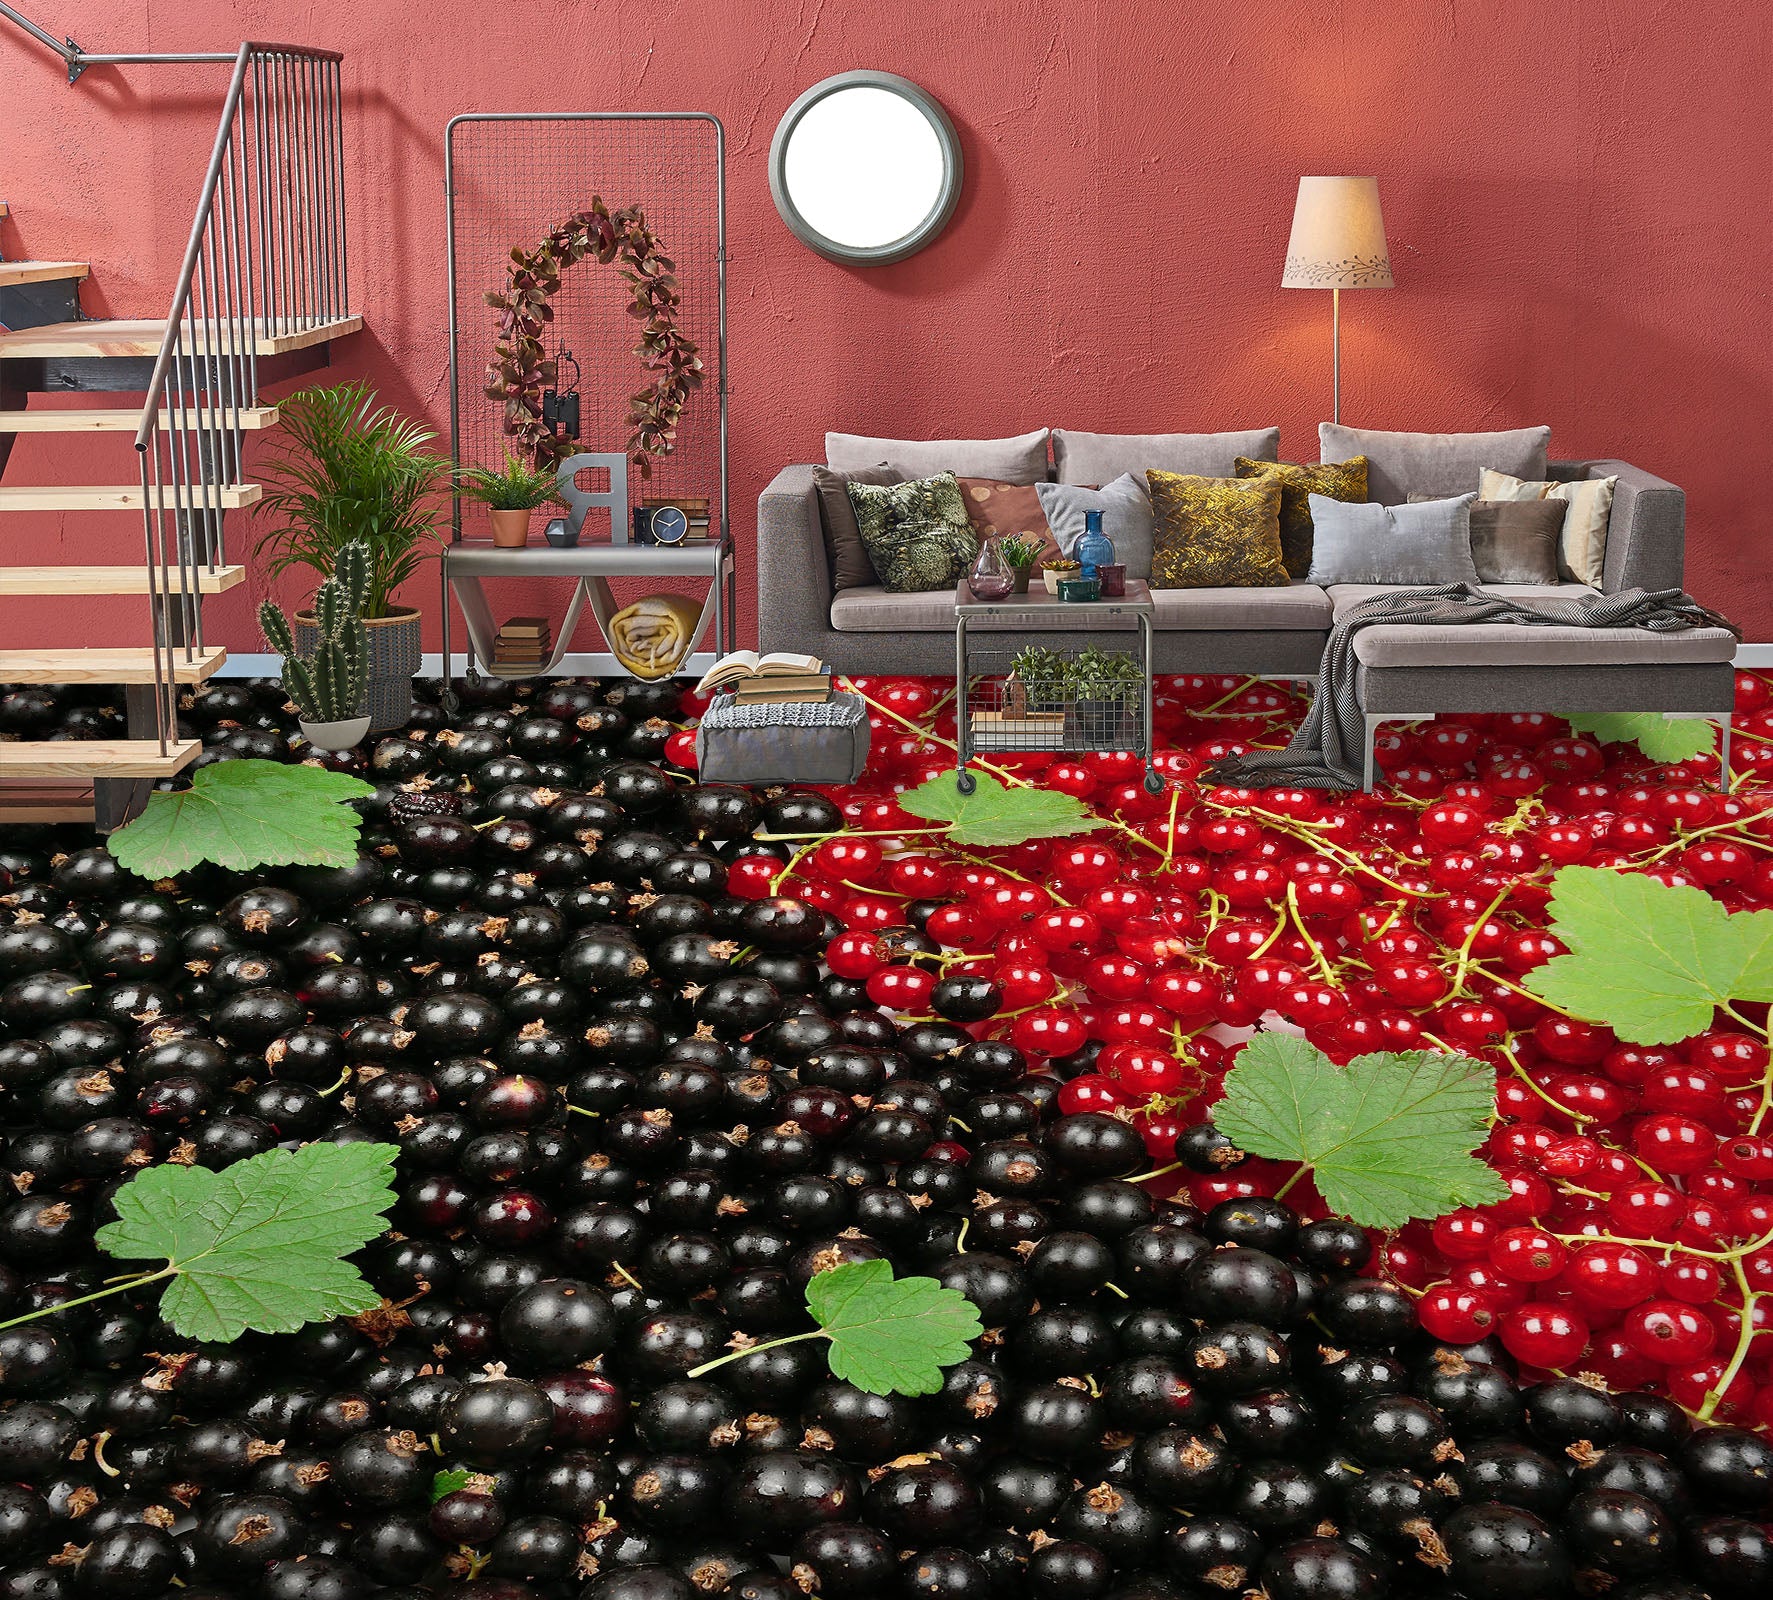 3D Red And Black Cherries 1407 Floor Mural  Wallpaper Murals Self-Adhesive Removable Print Epoxy